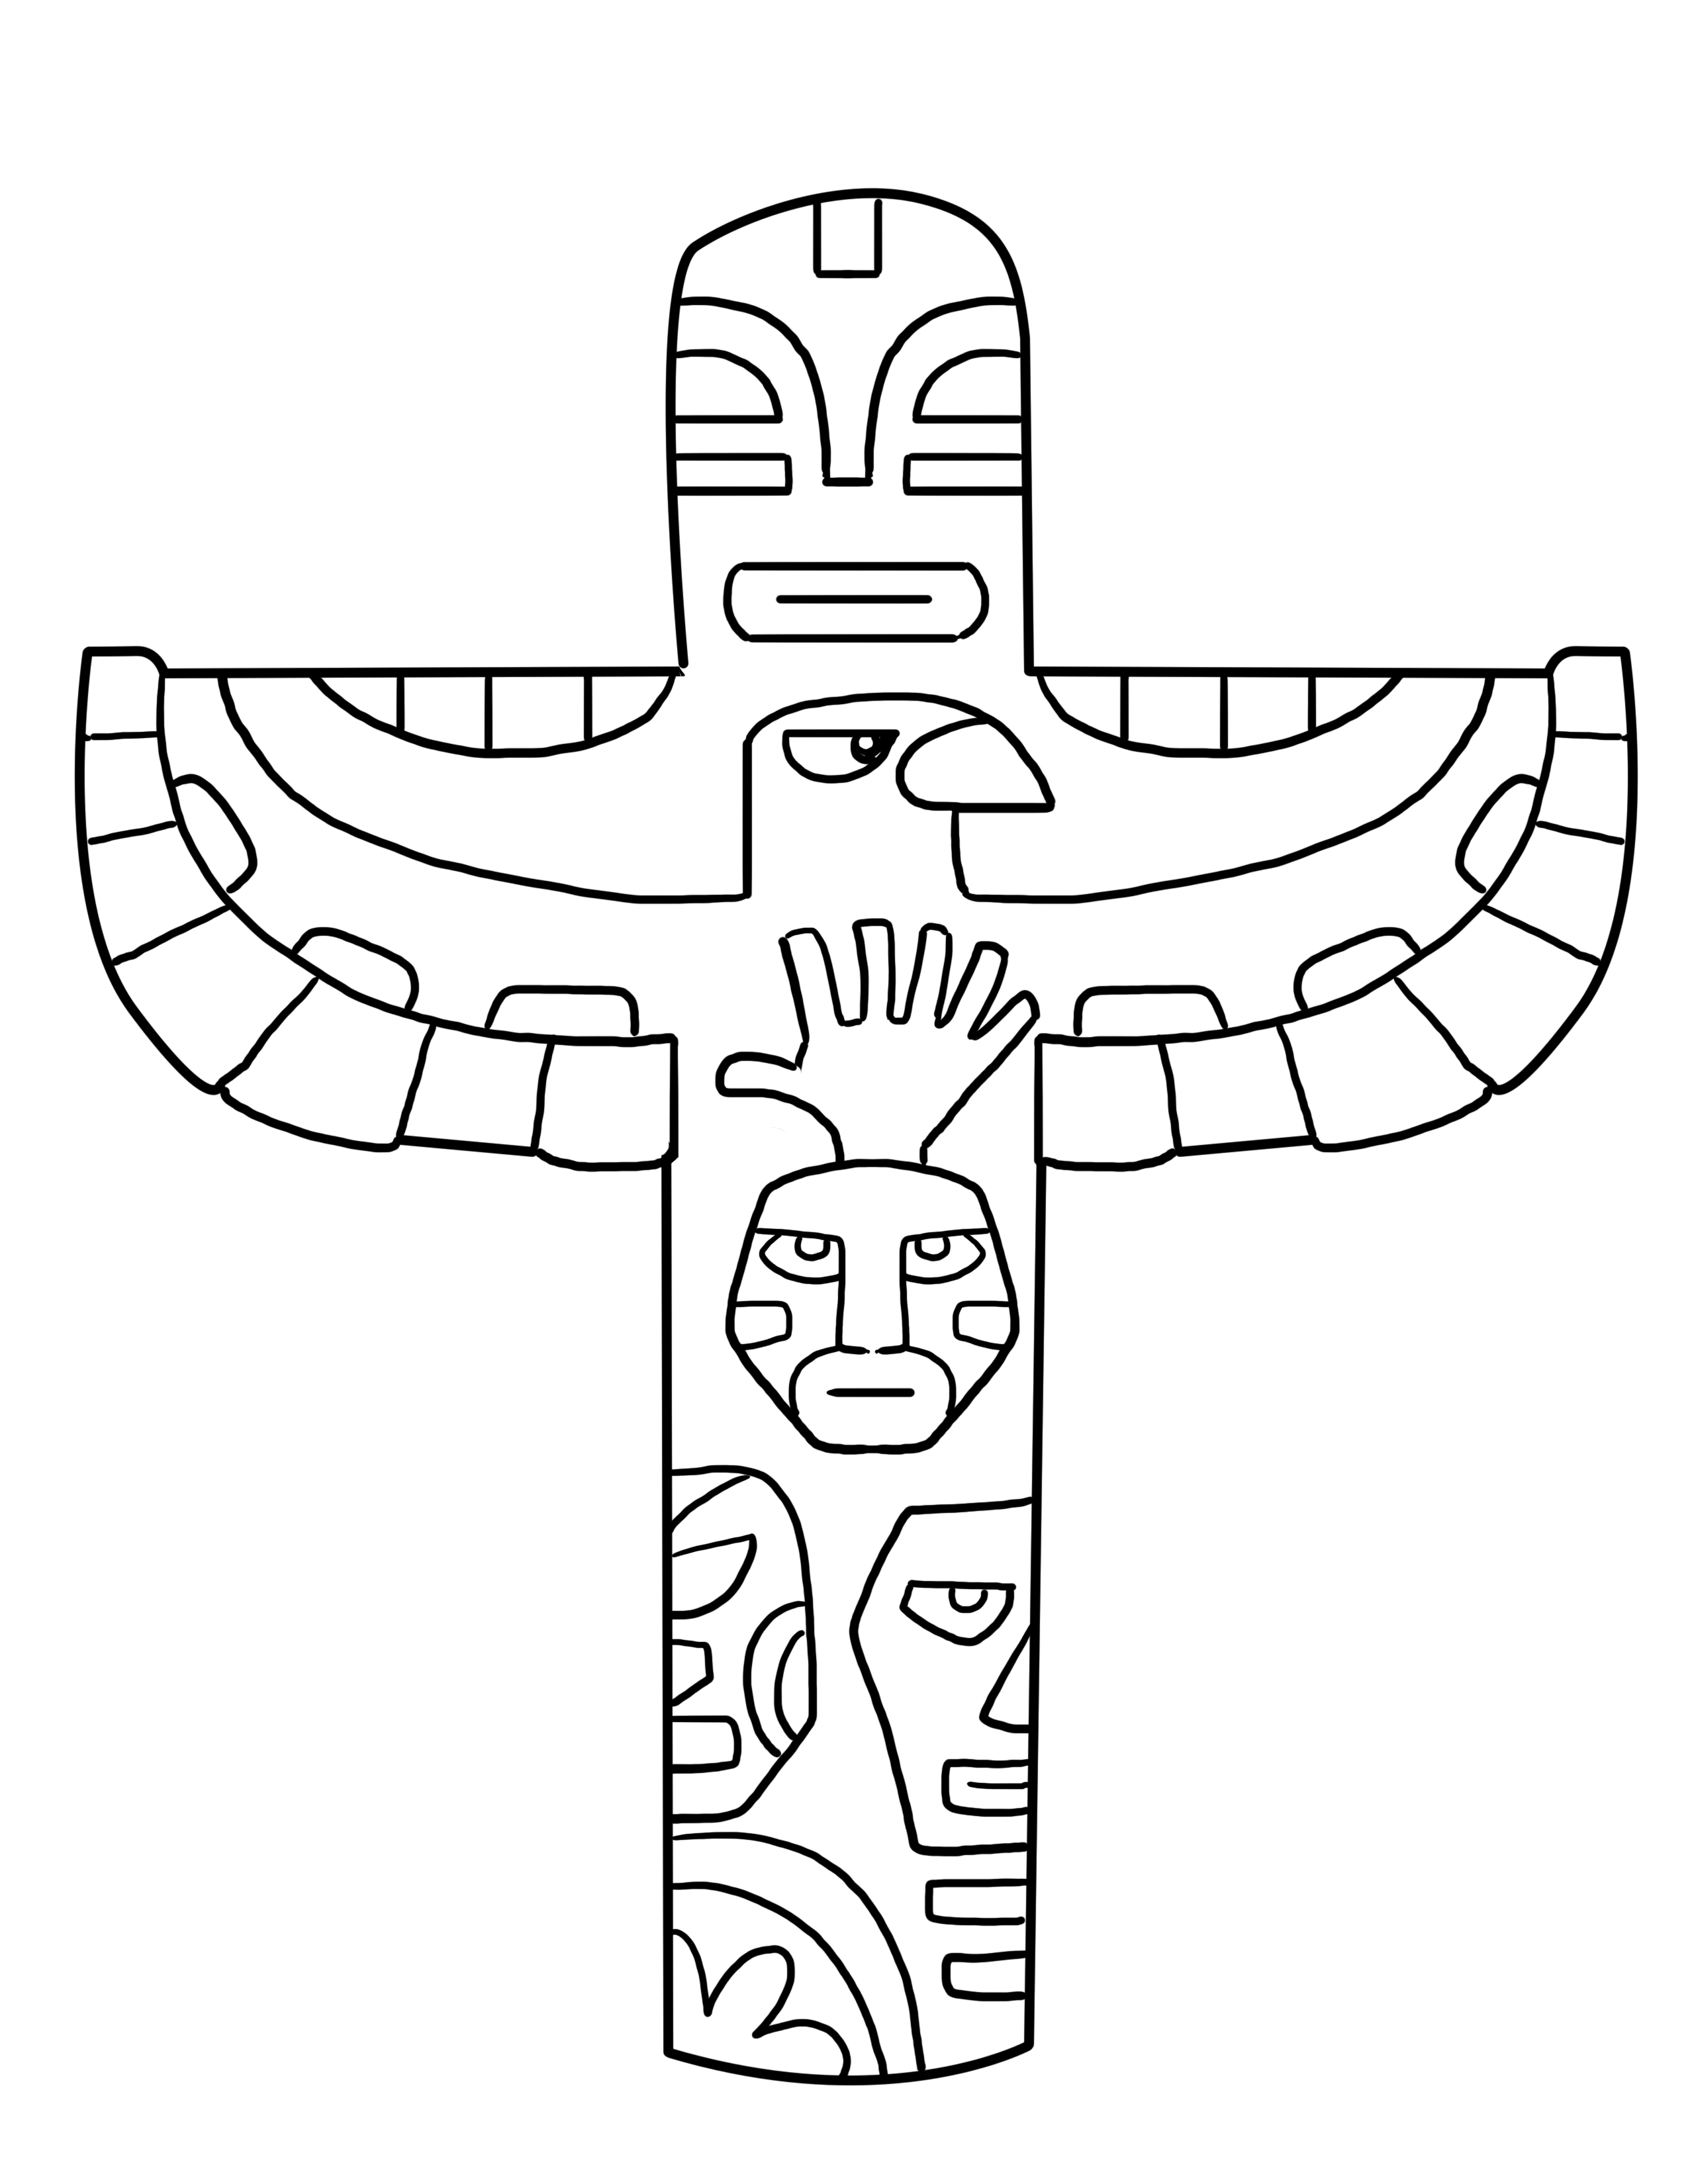 slashcasual-totem-pole-coloring-pages